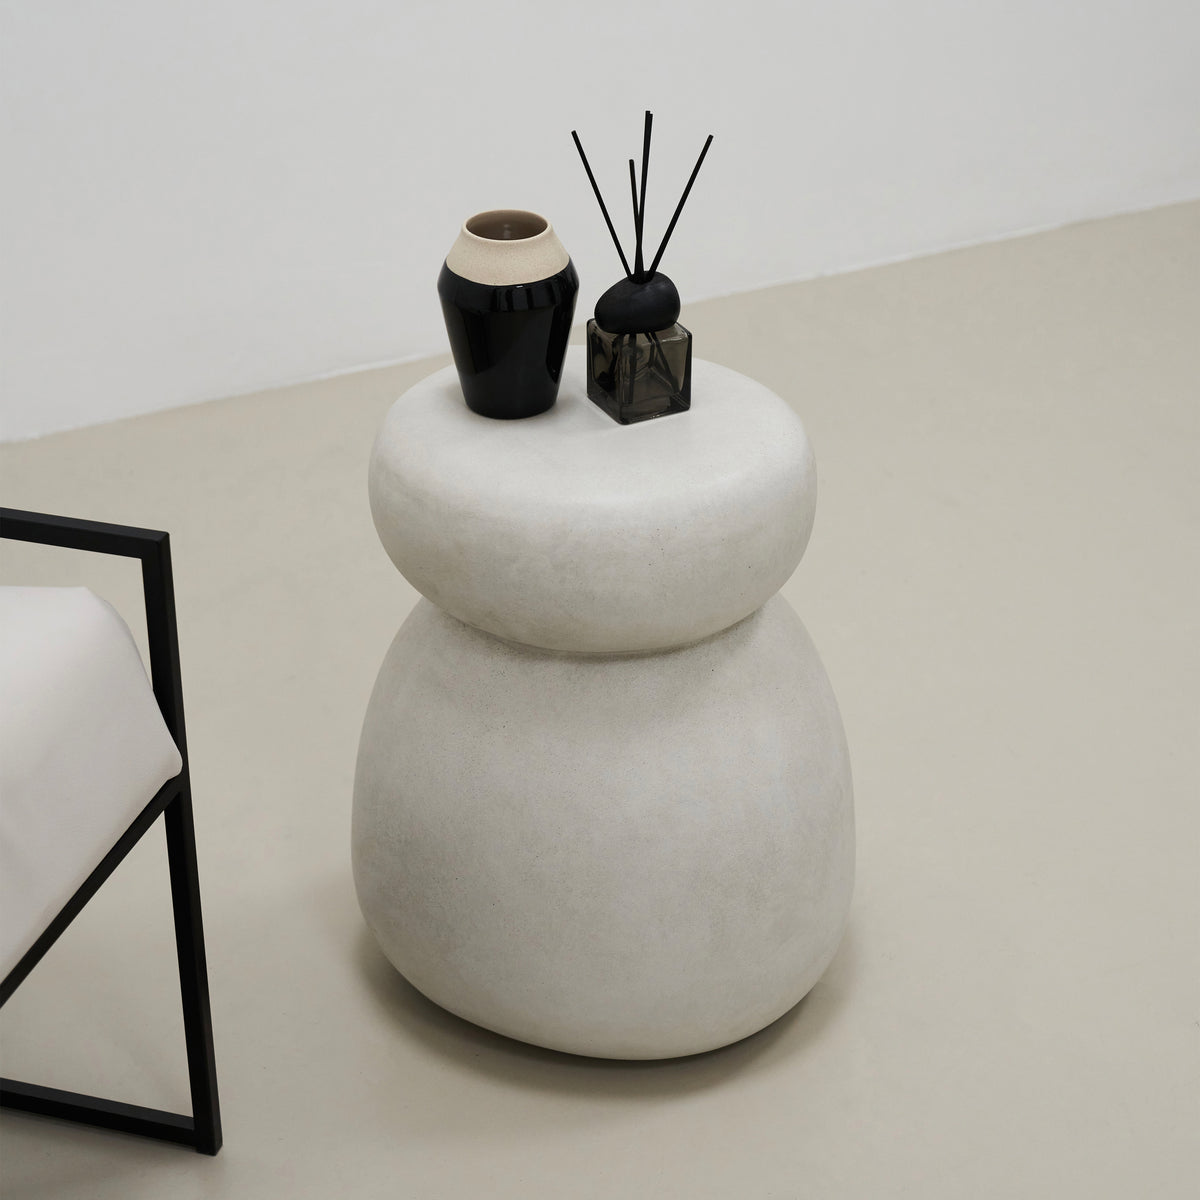 Minimal Concrete Side Table decorated with ceramic and incense